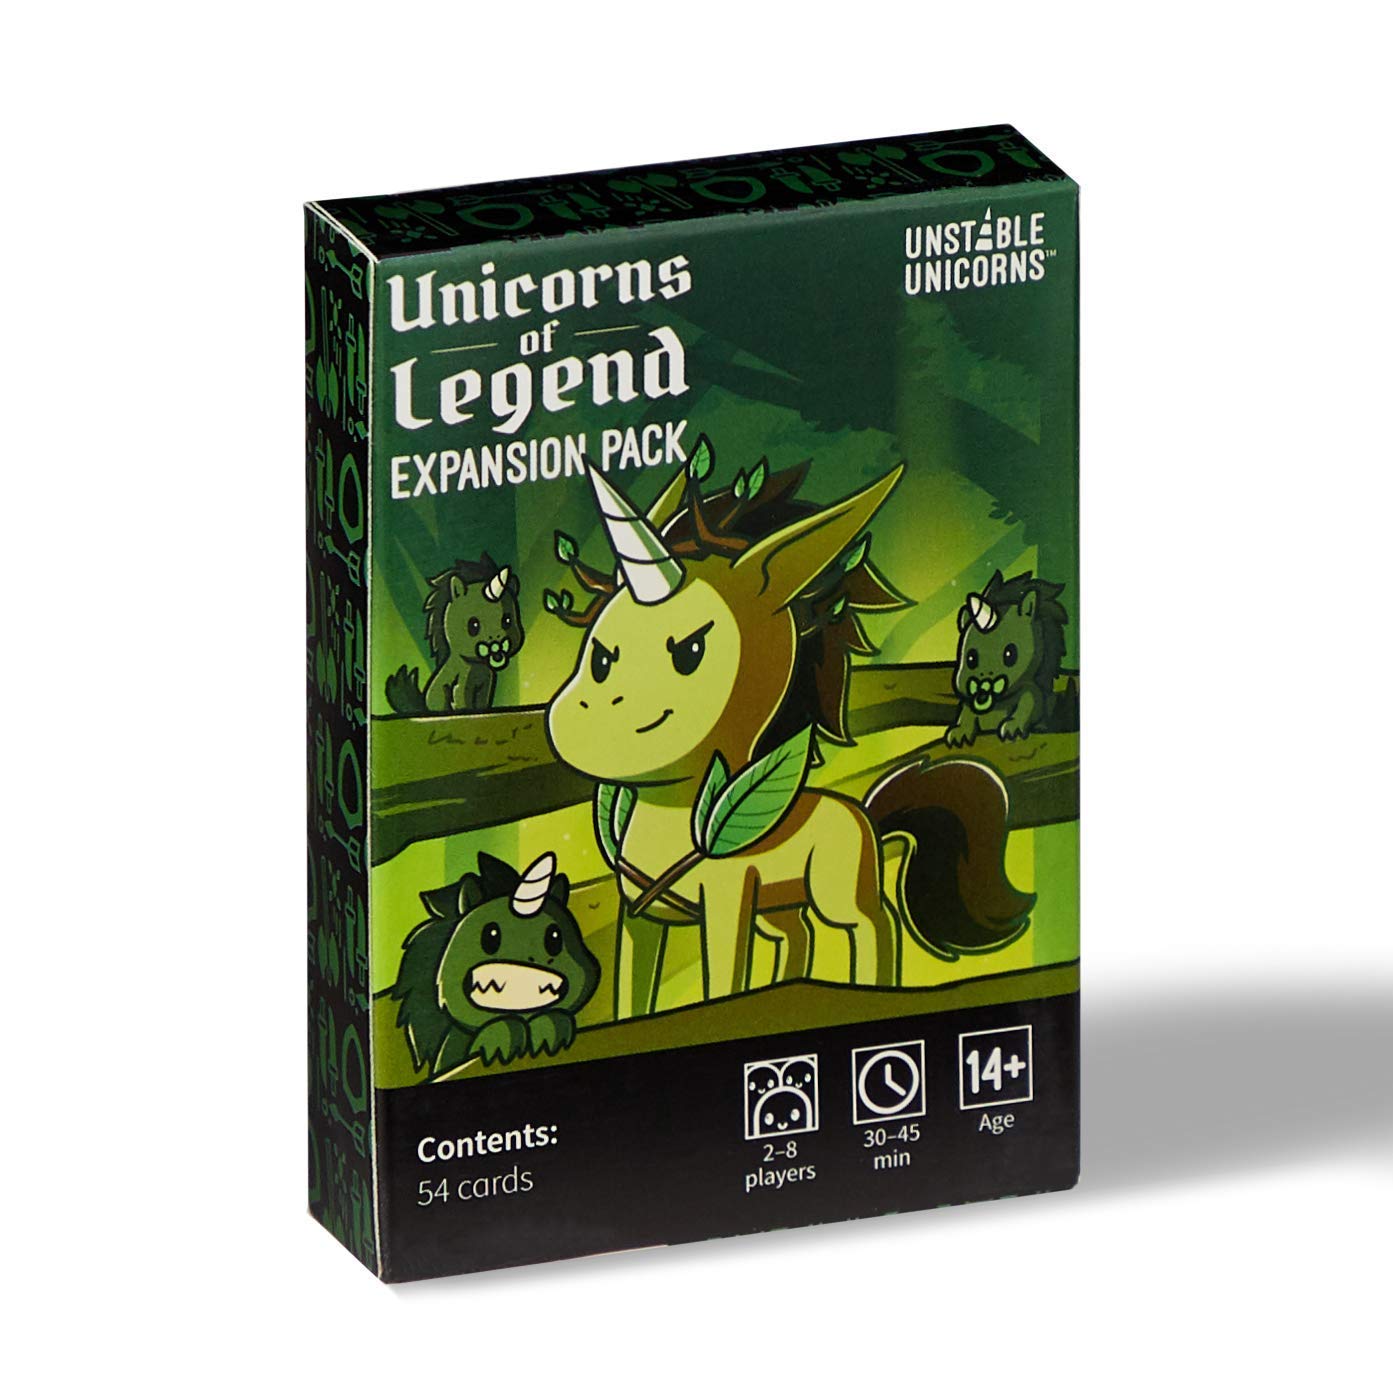 Unstable Unicorns Unicorns of Legend Expansion Pack - Designed to be Added to Your Card Game